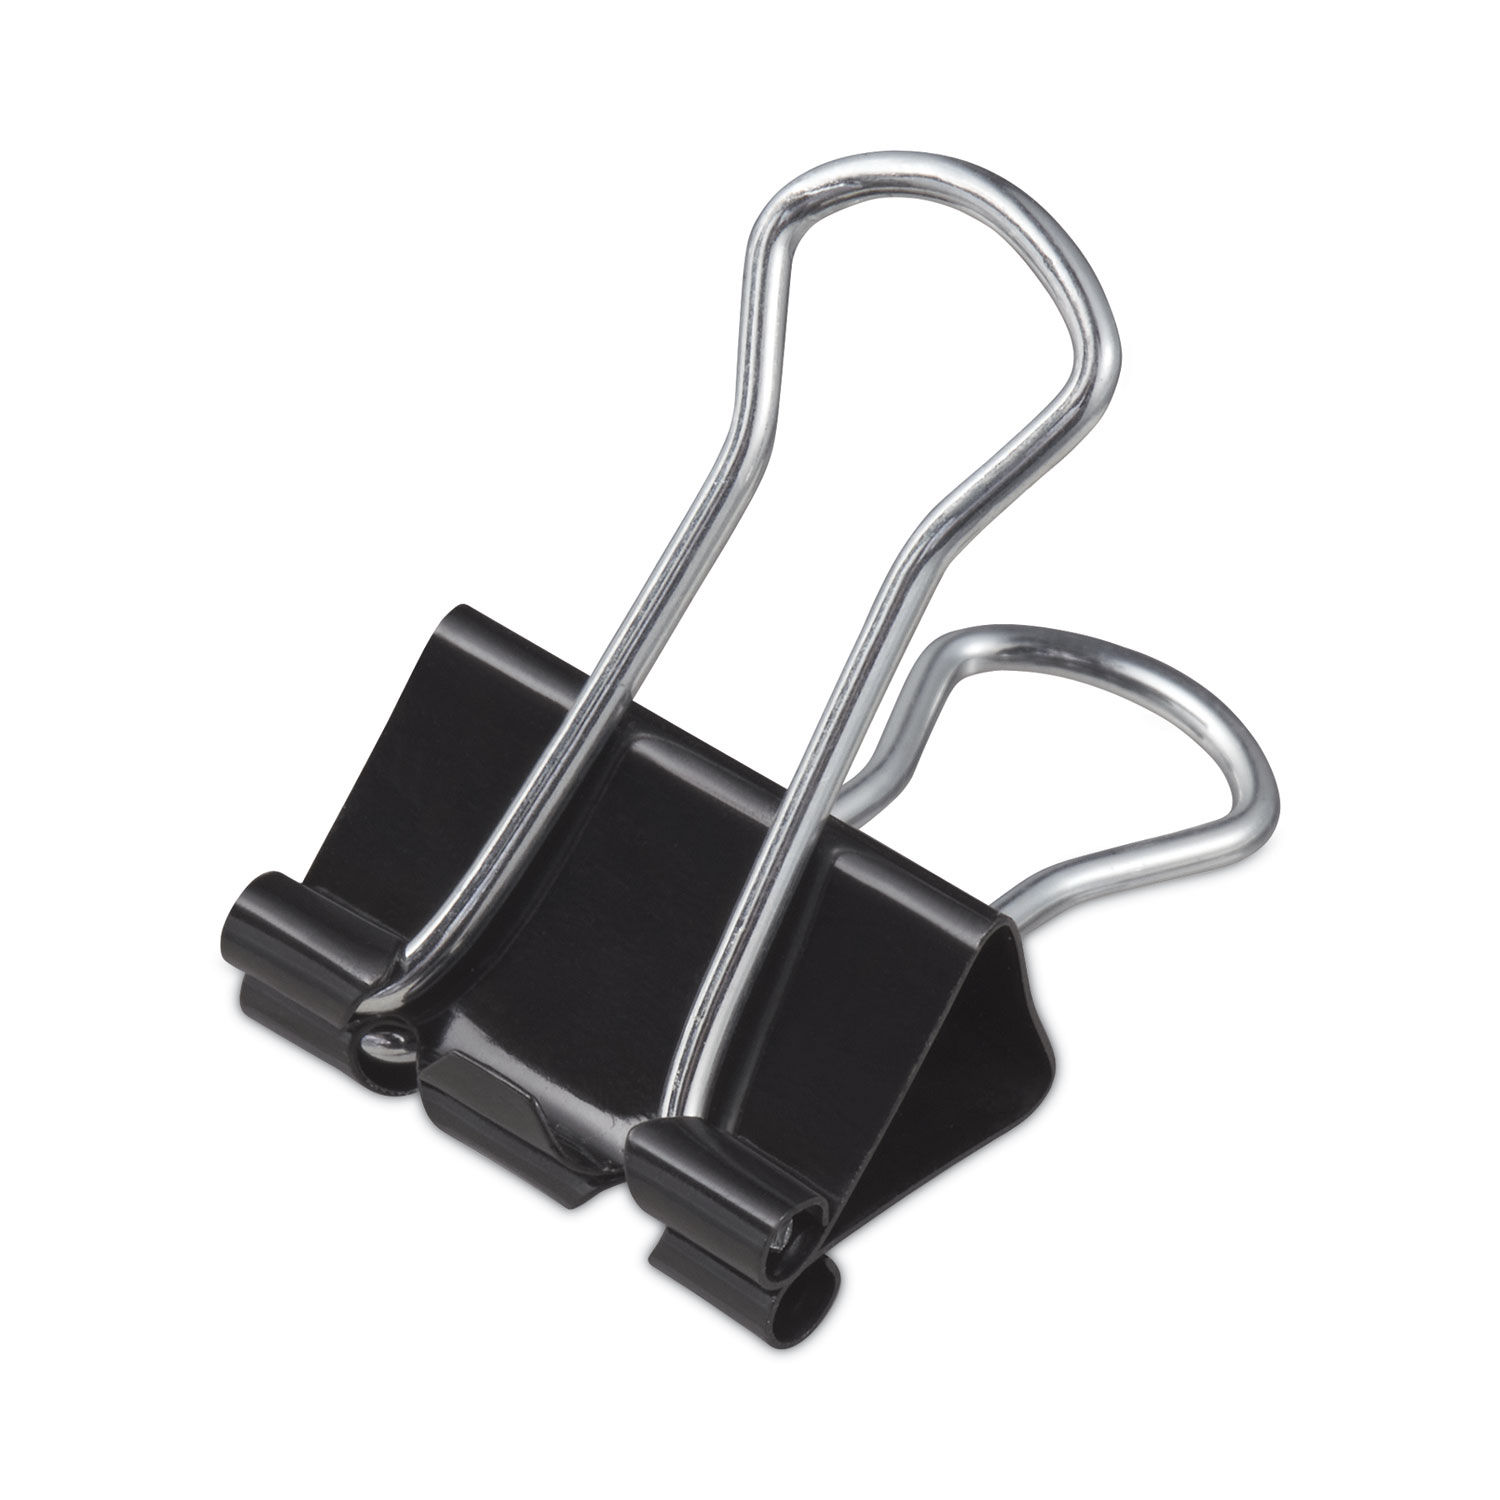 UNV10200 Small Binder Clips by Universal